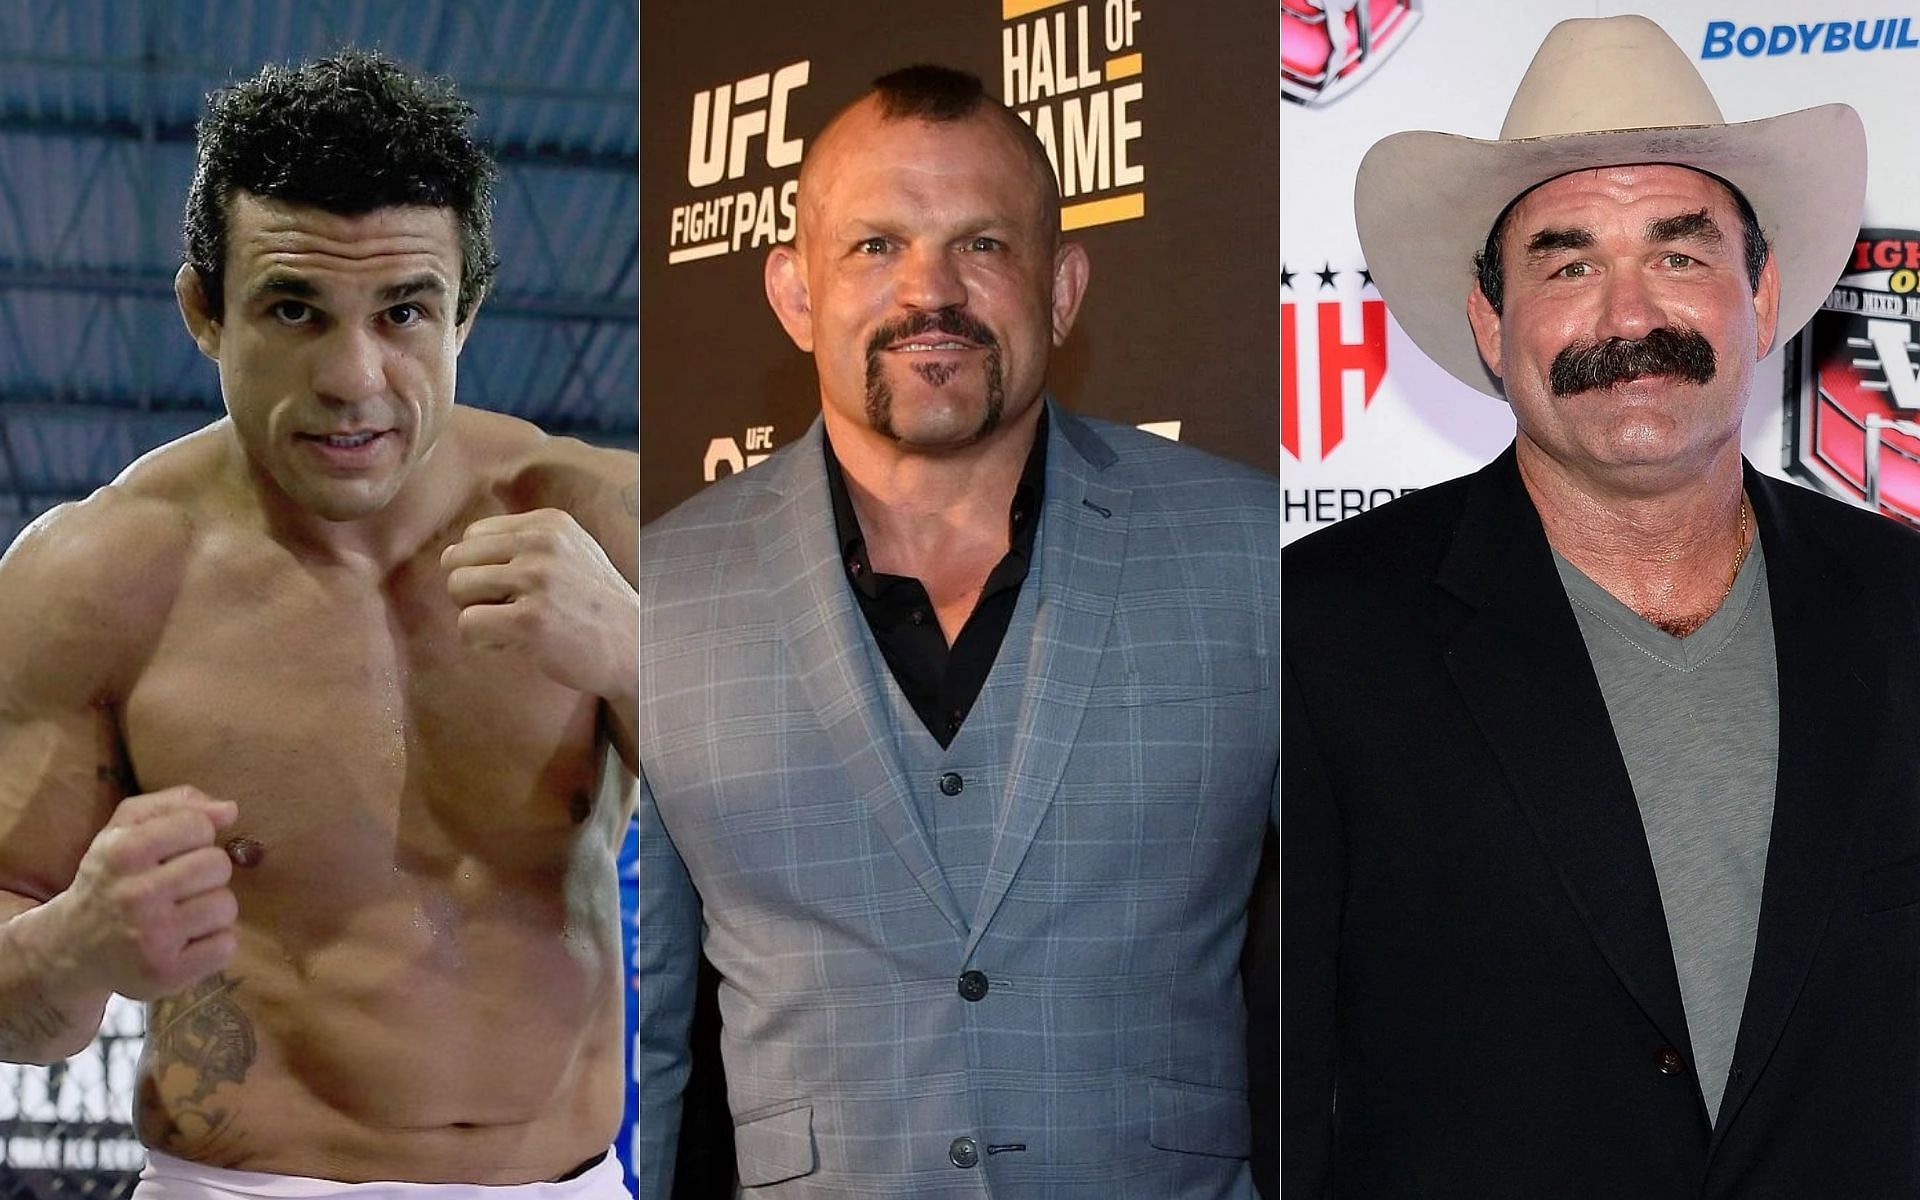 Vitor Belfort, Chuck Liddell and Don Frye were responsible for some of the best knockouts of the UFC